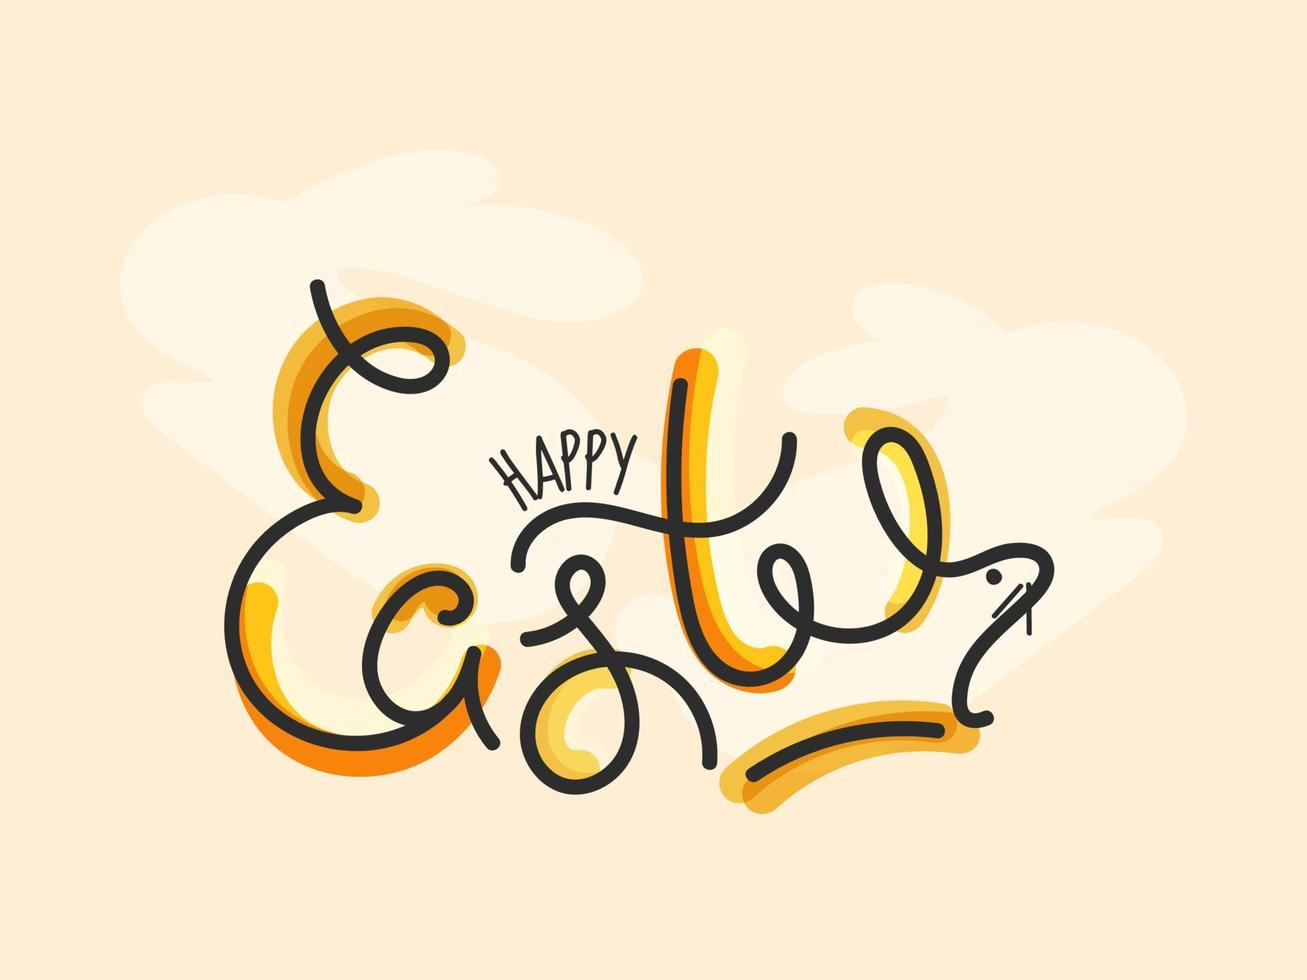 Happy Easter Font with Yellow and Orange Brush Effect on Light Peach Background. vector